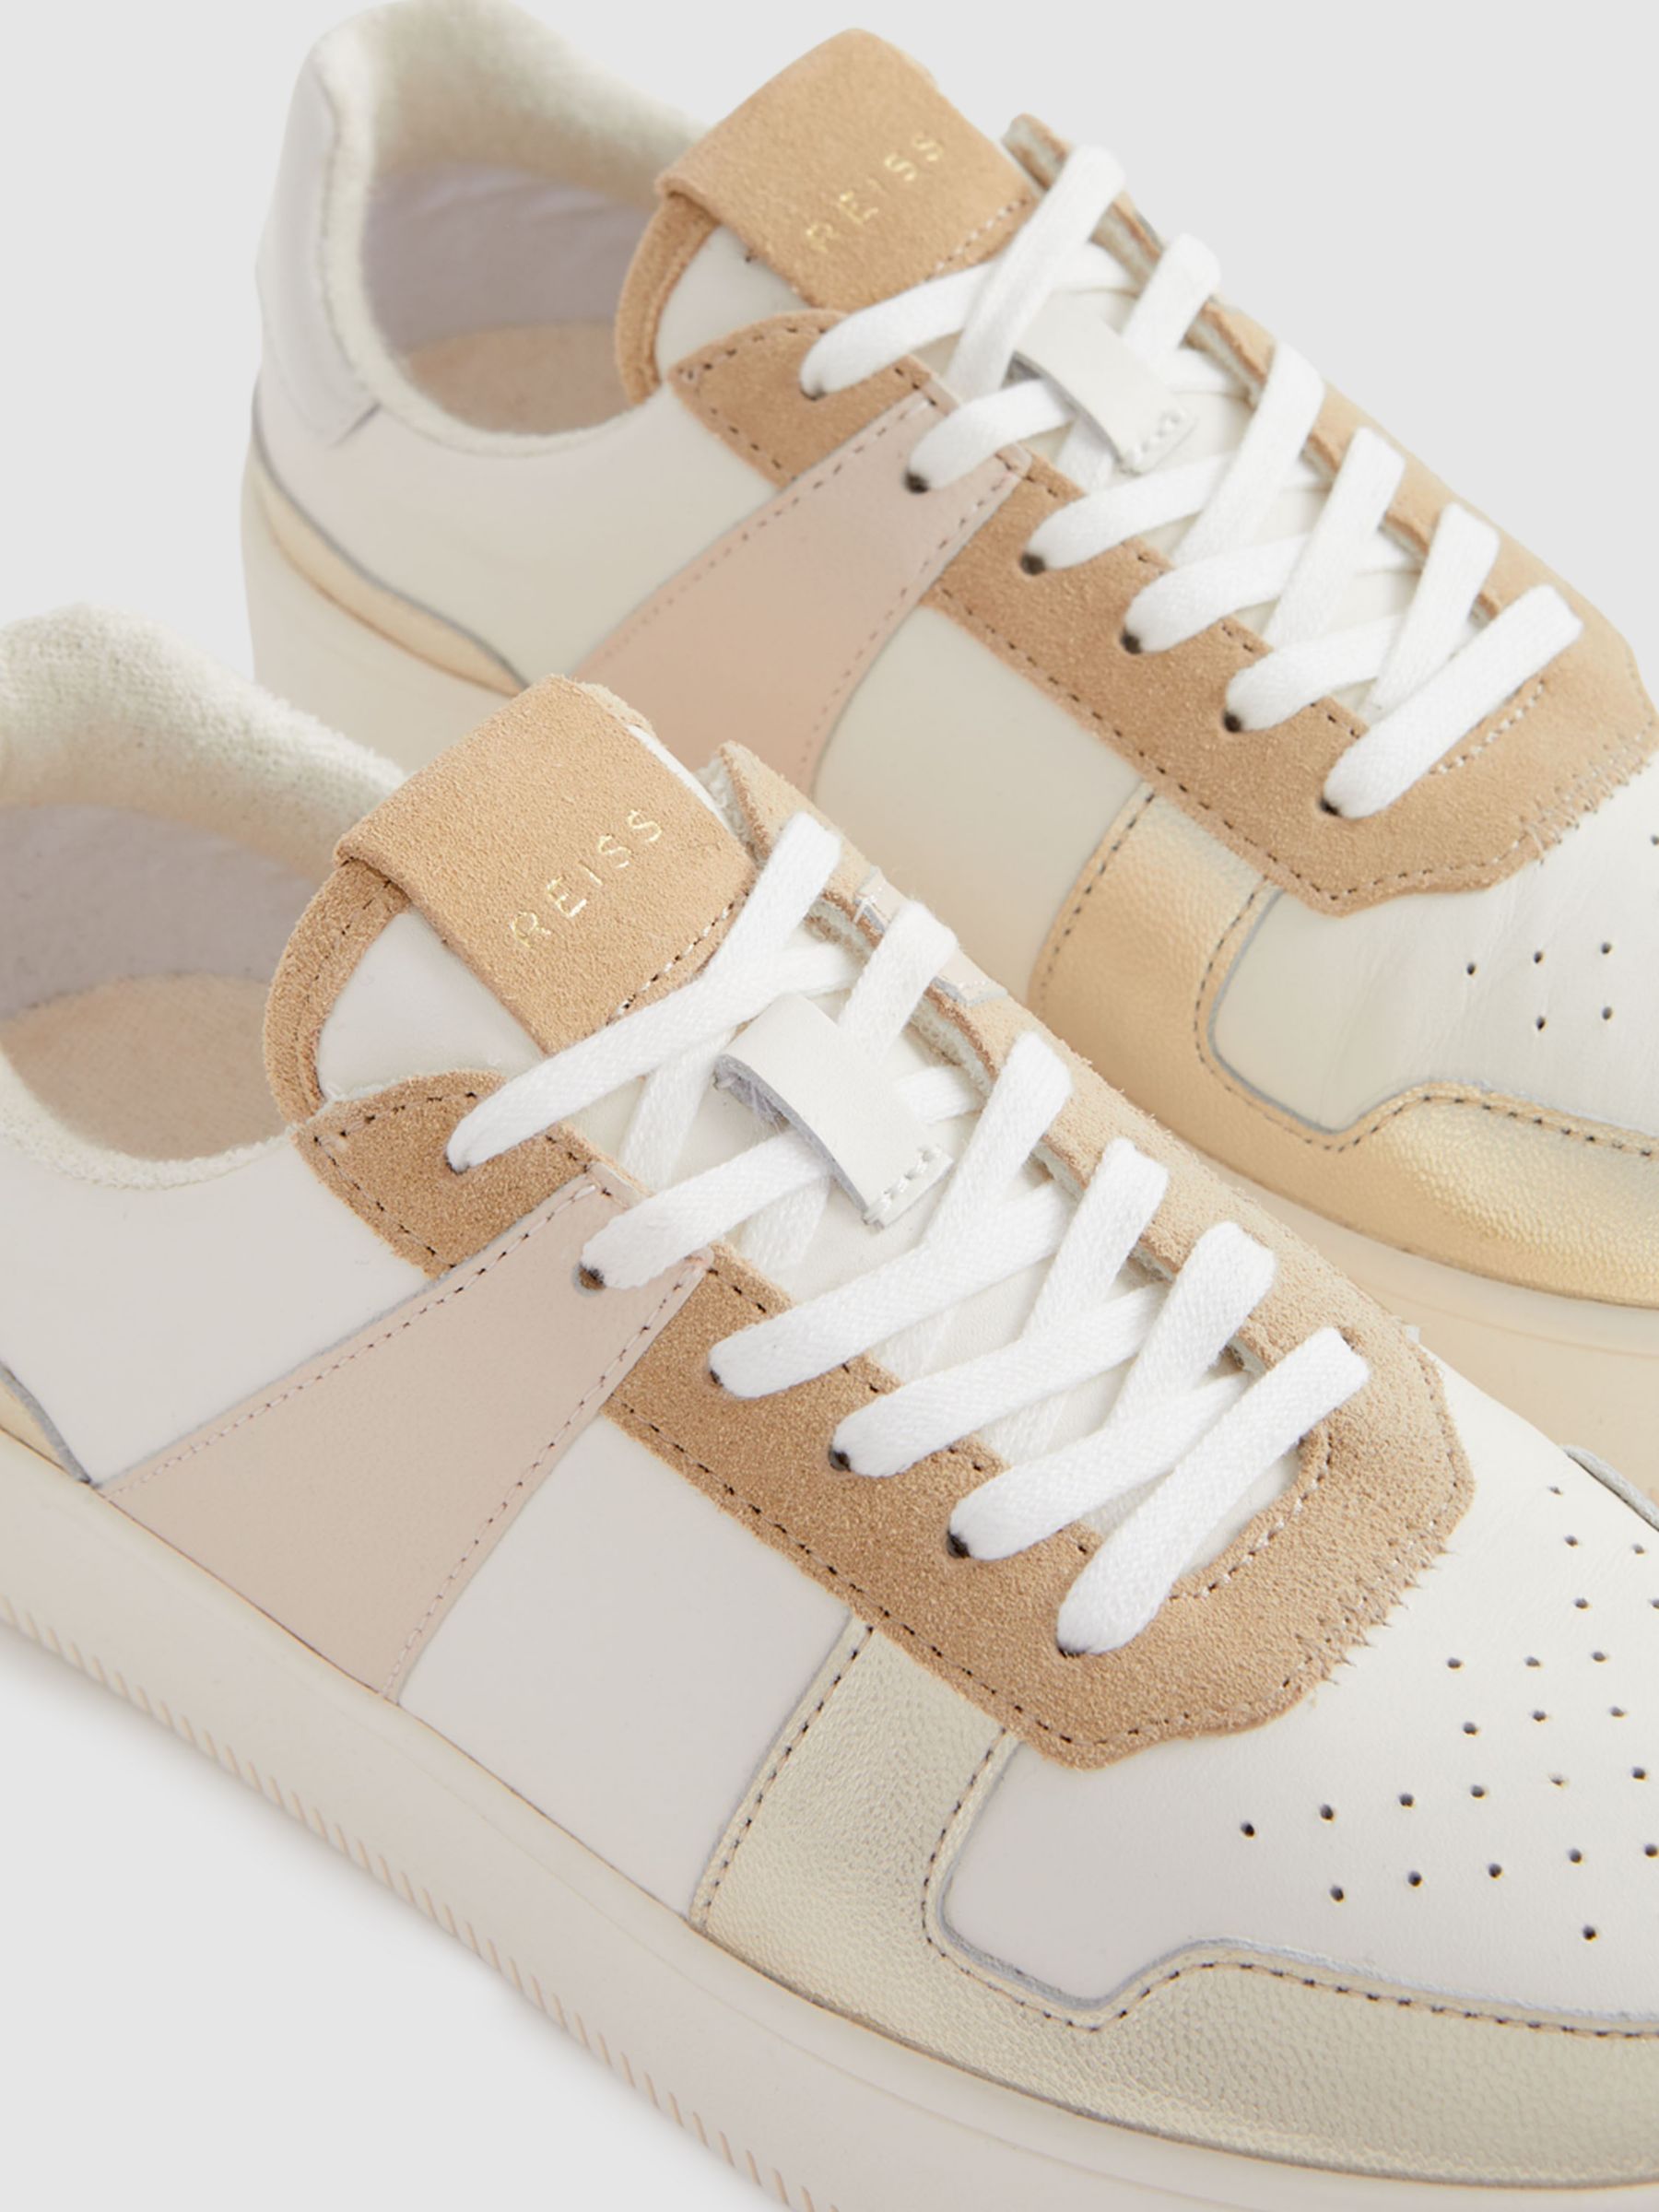 Buy Reiss Aira Colour Block Leather Trainers, White/Multi Online at johnlewis.com